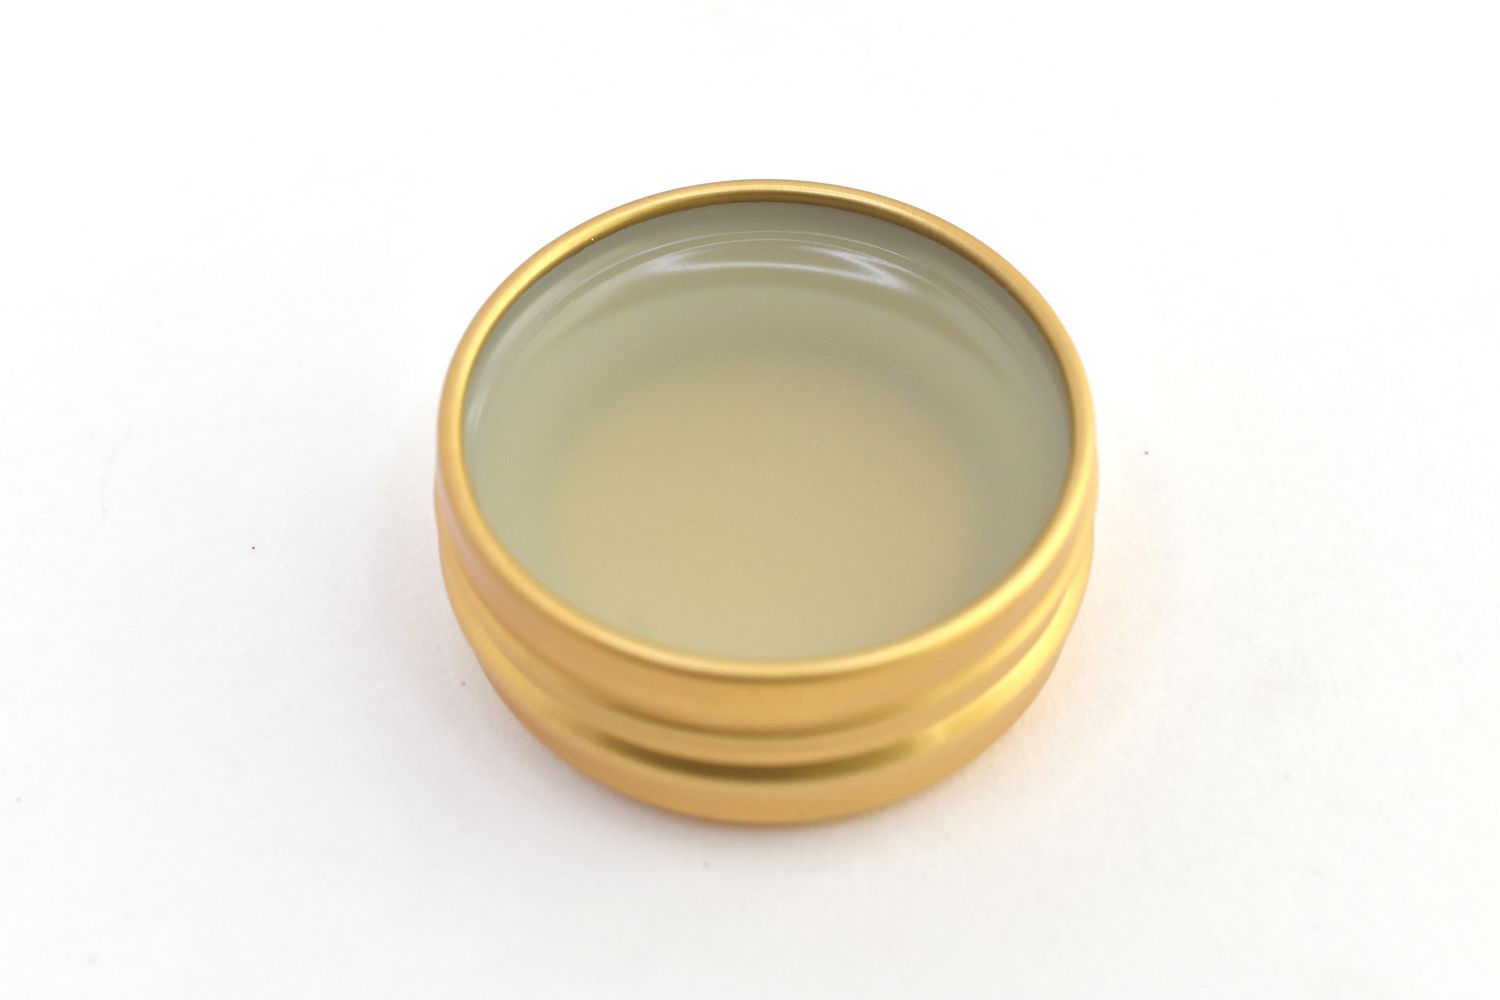 Honey Citrus Lip Balm Cooling in a Container